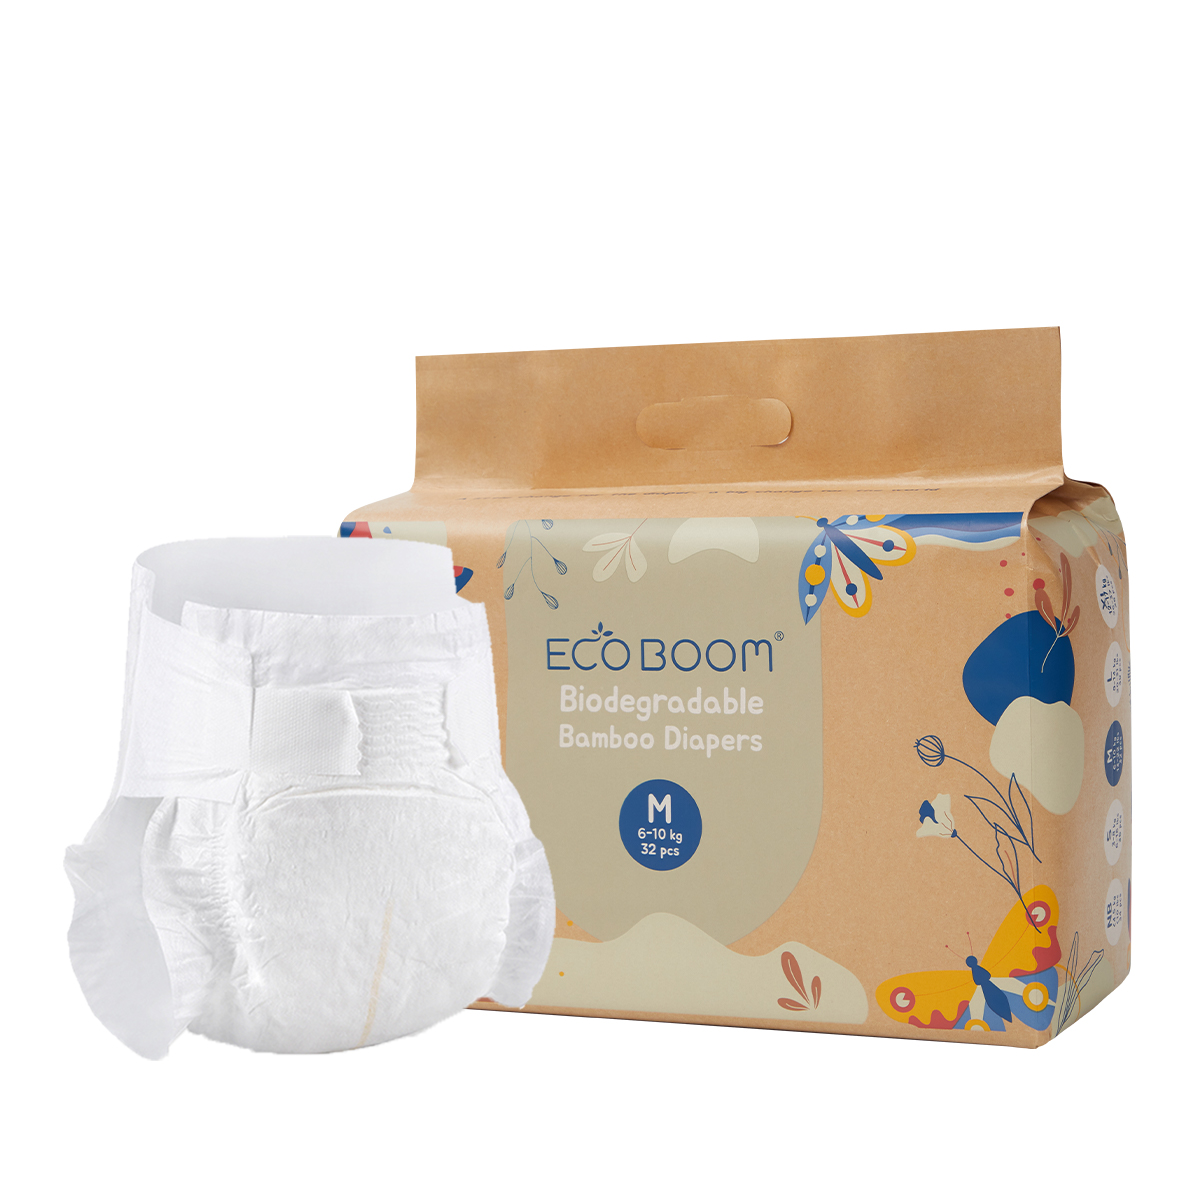 ECO BOOM Join Ecoboom bamboo diapers manufacturers-2